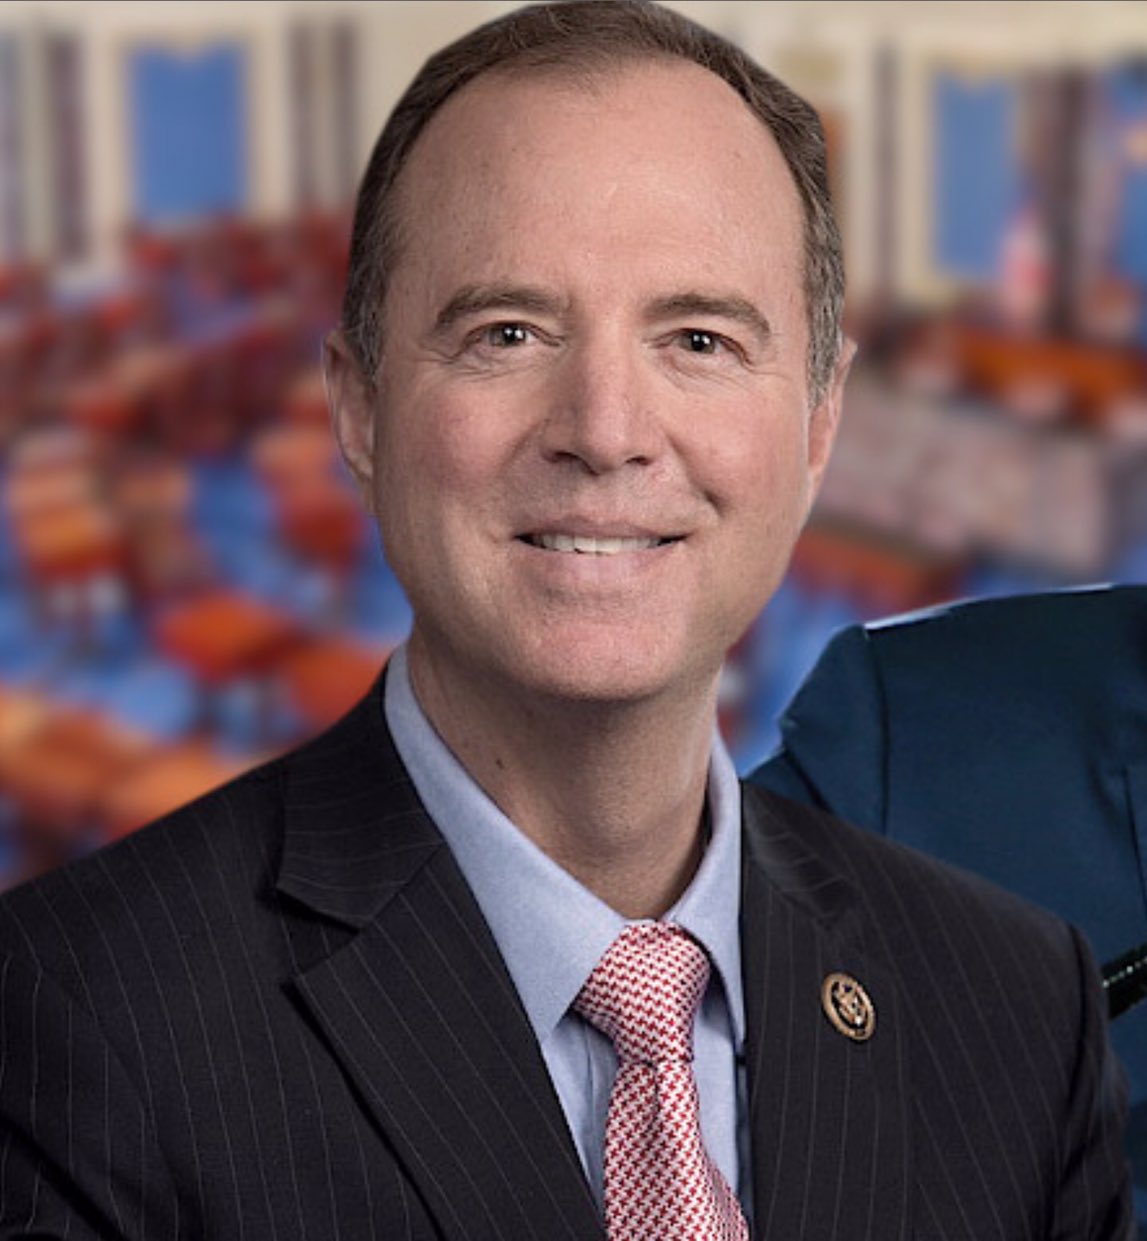 ⚔️⚜️Vani⚜️⚔️ ❤️America 1st❤️ on Twitter: "BREAKING: Today at the House Hearing on Russian Collusion, House Republicans issue a letter directly to #AdamSchiff to resign!… https://t.co/8CW73Lwcrn"